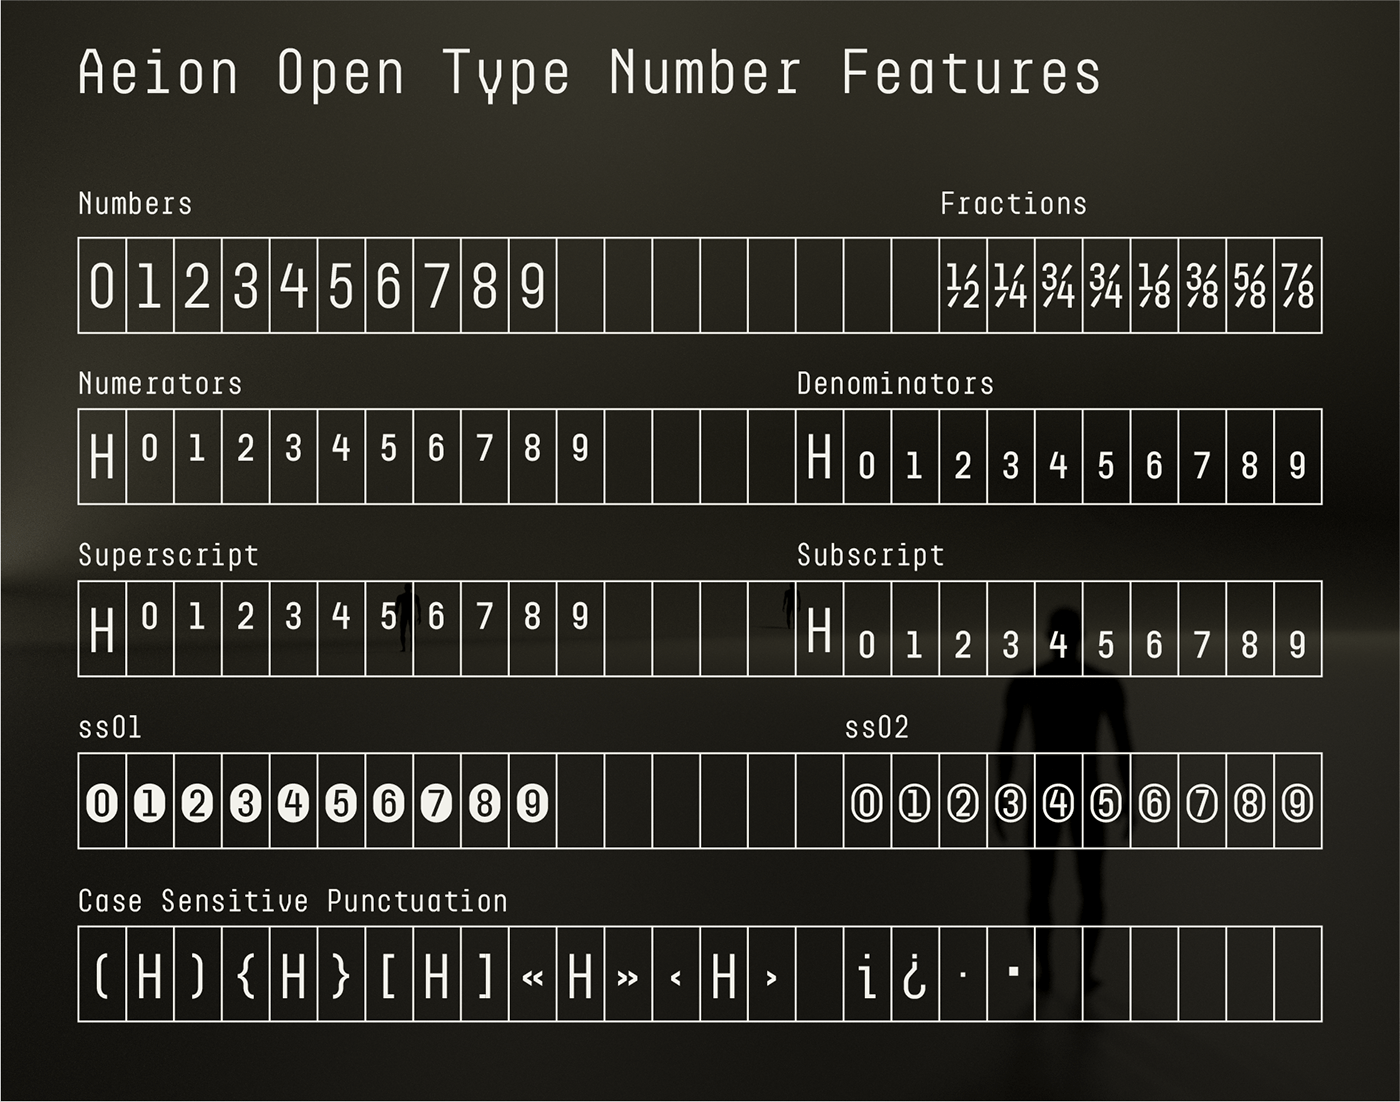 open type features of anion font